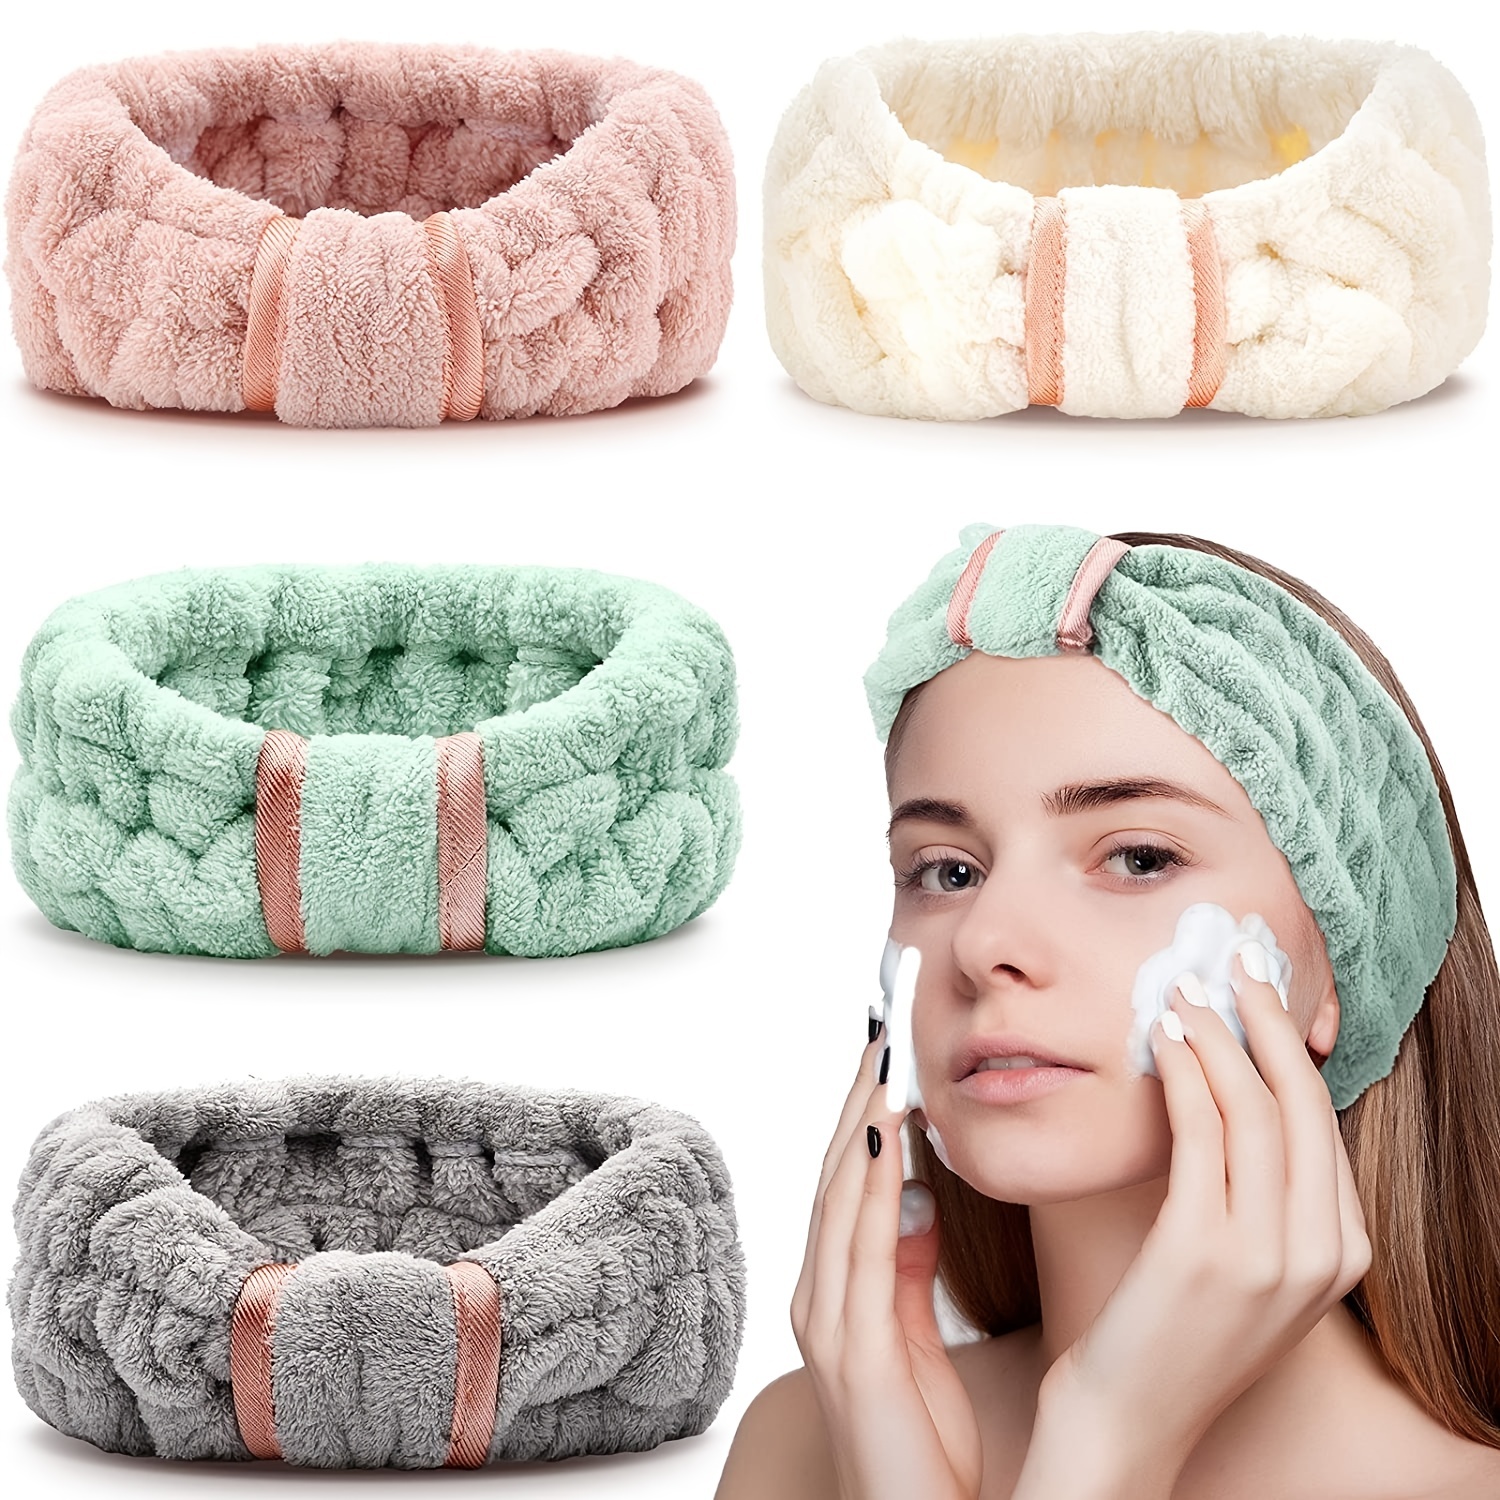 Sponge Spa Headband for Washing Face, 2 Pack Makeup Headbands Women Girls,  Wash Yoga Sports Shower Head Band Terry Towel Cloth Hair Skincare, Removal